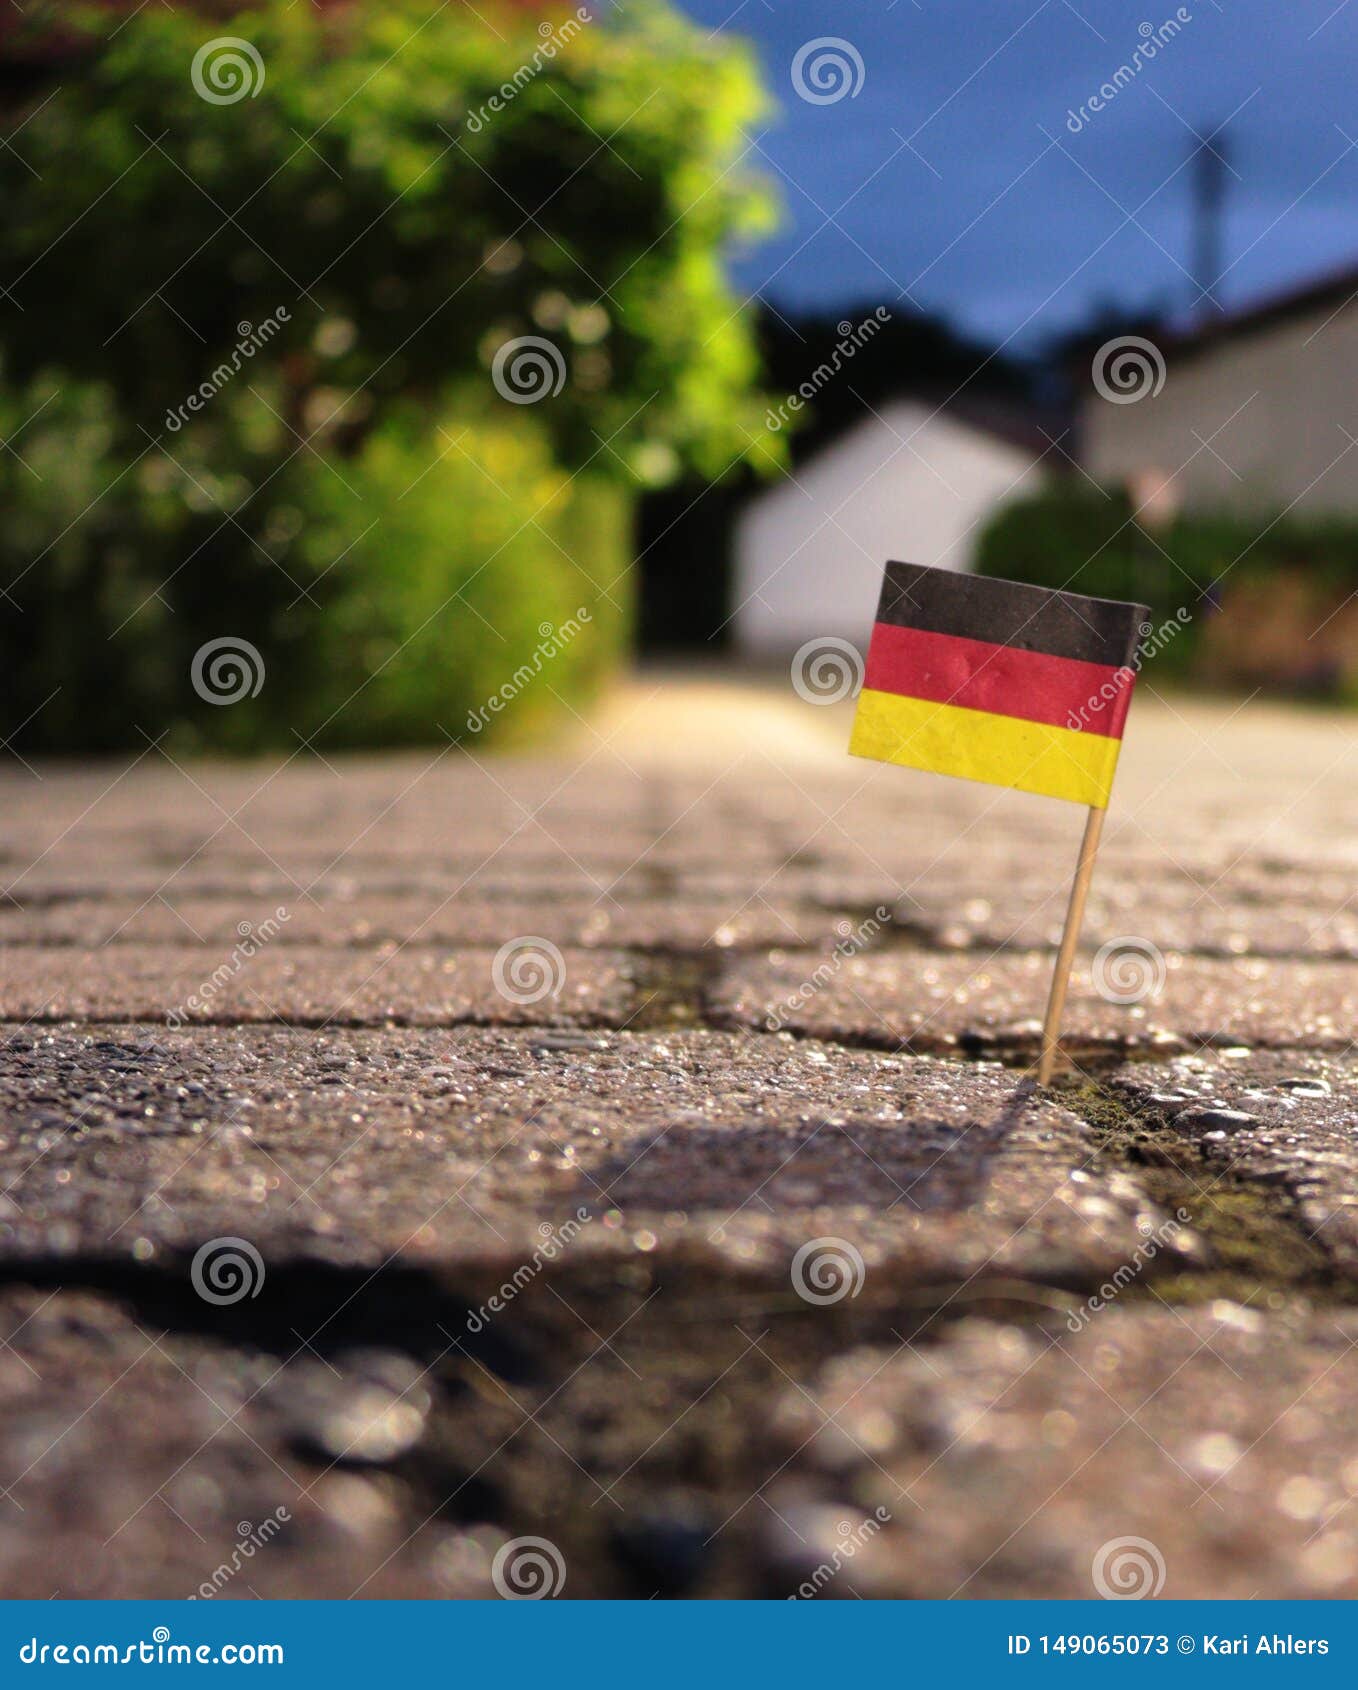 A German toothpick flag is stuck in the sidewalk crack after a night of revelry and celebration